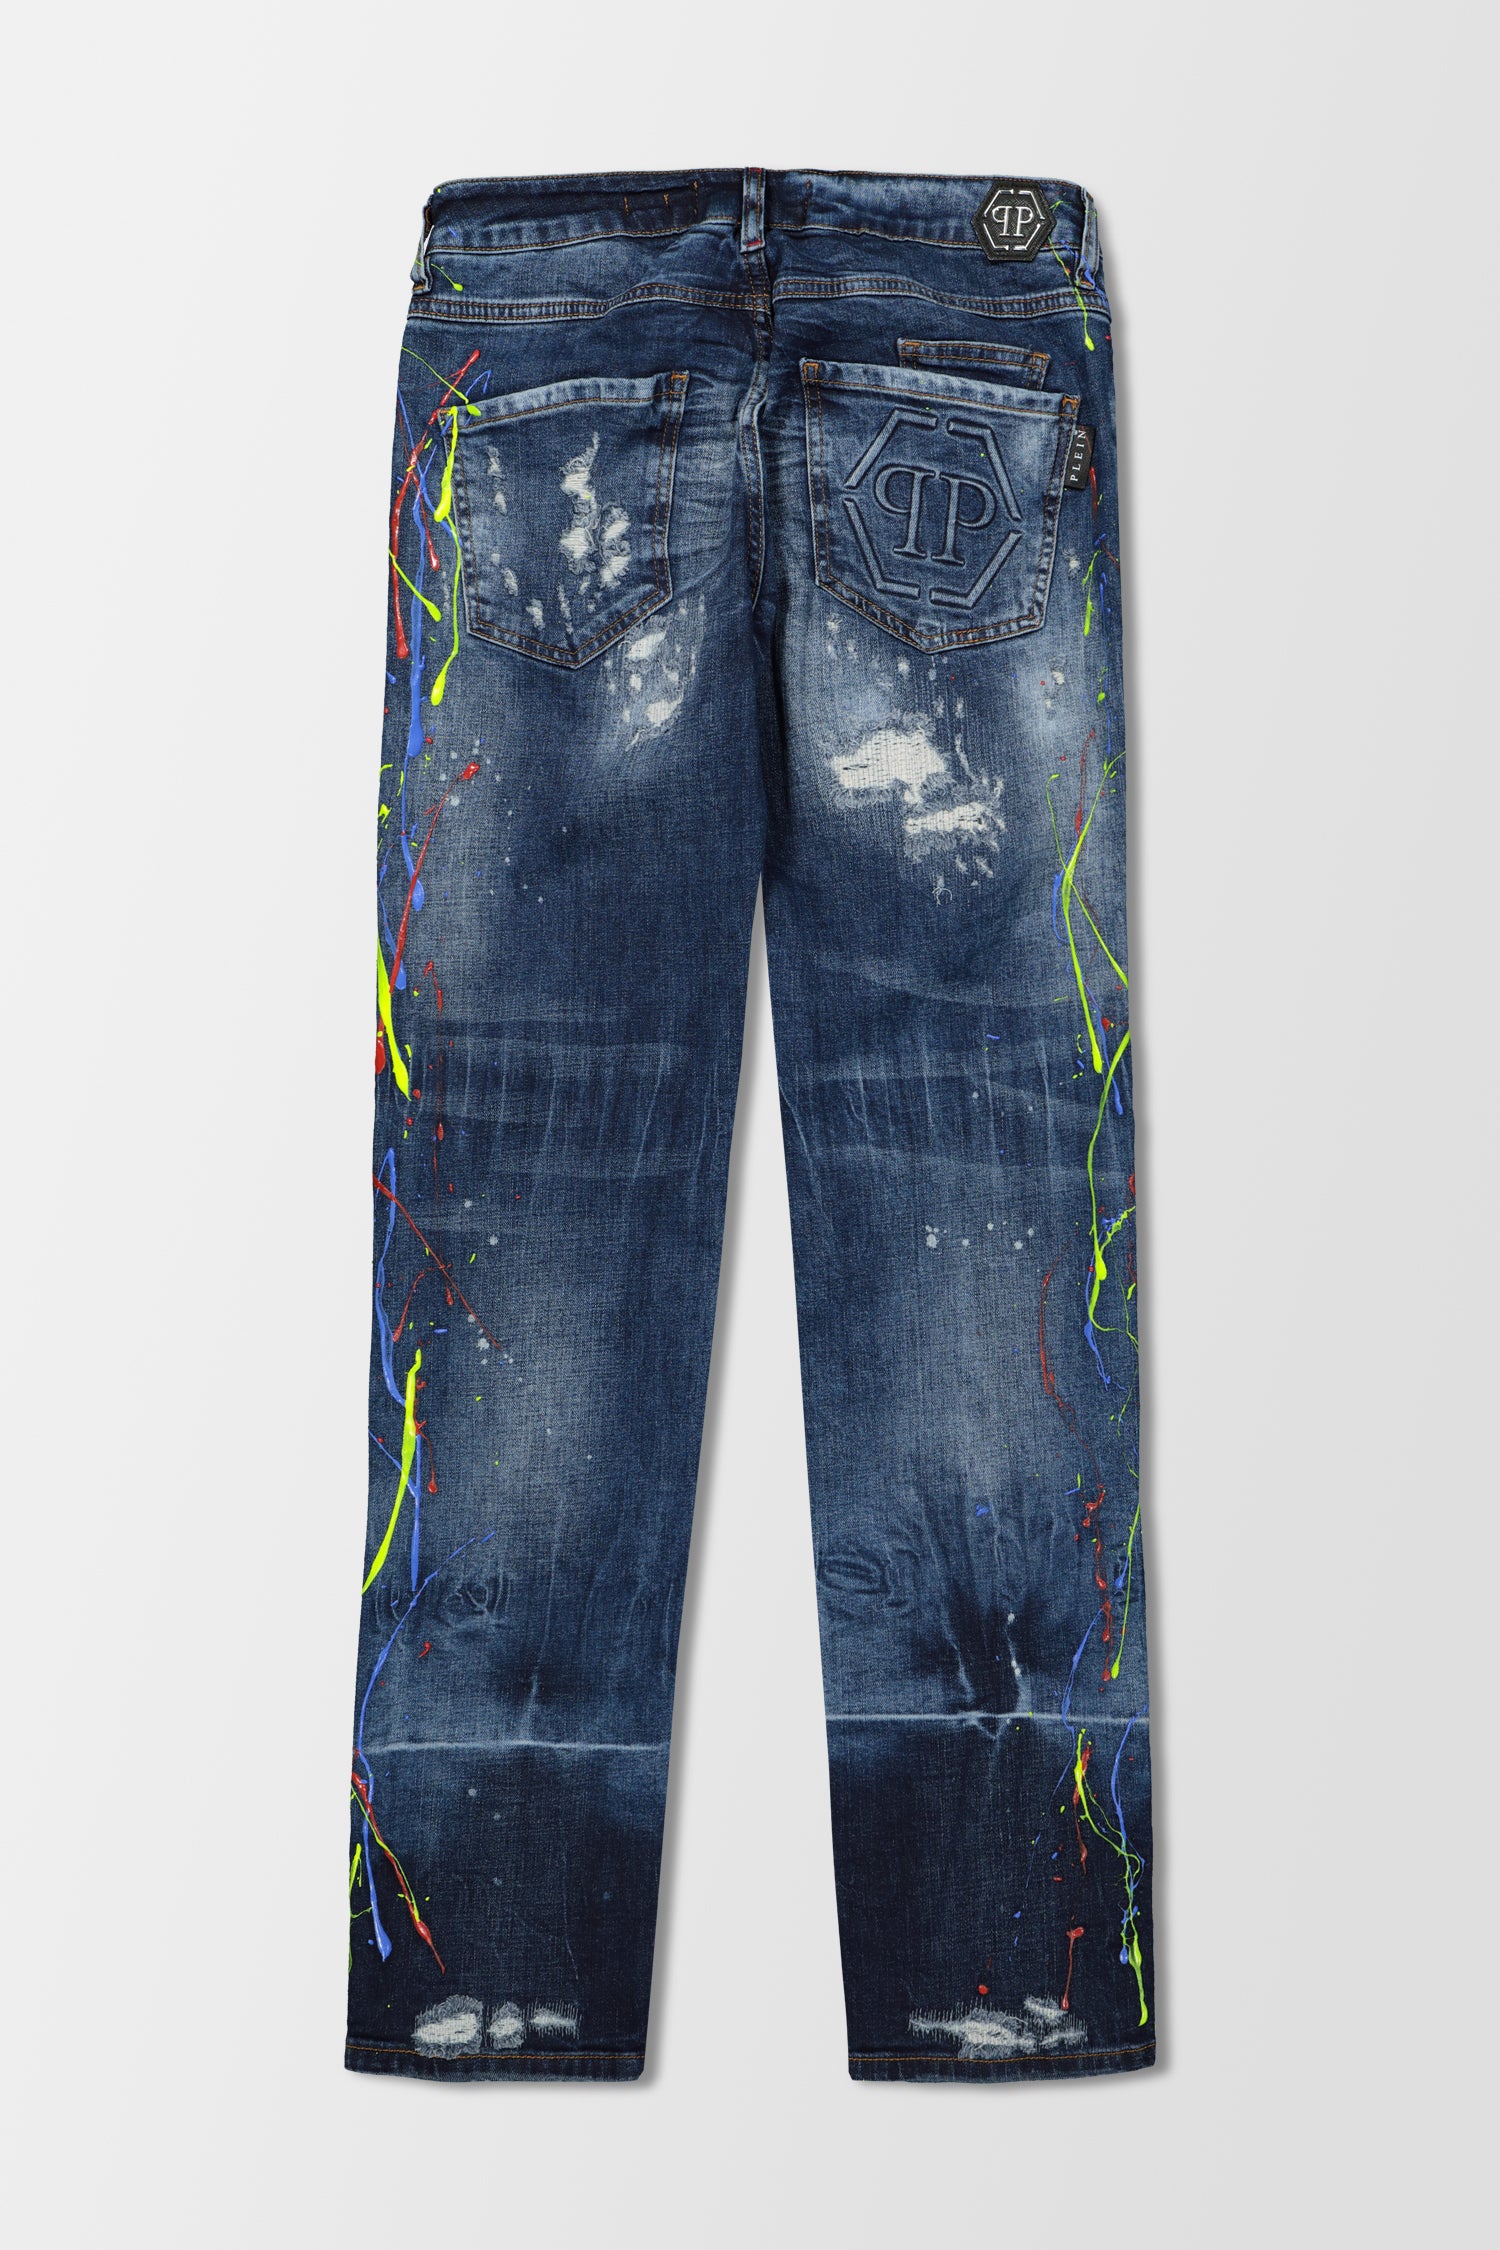 Philipp Plein Super Straight Cut Miss You Painted Jeans